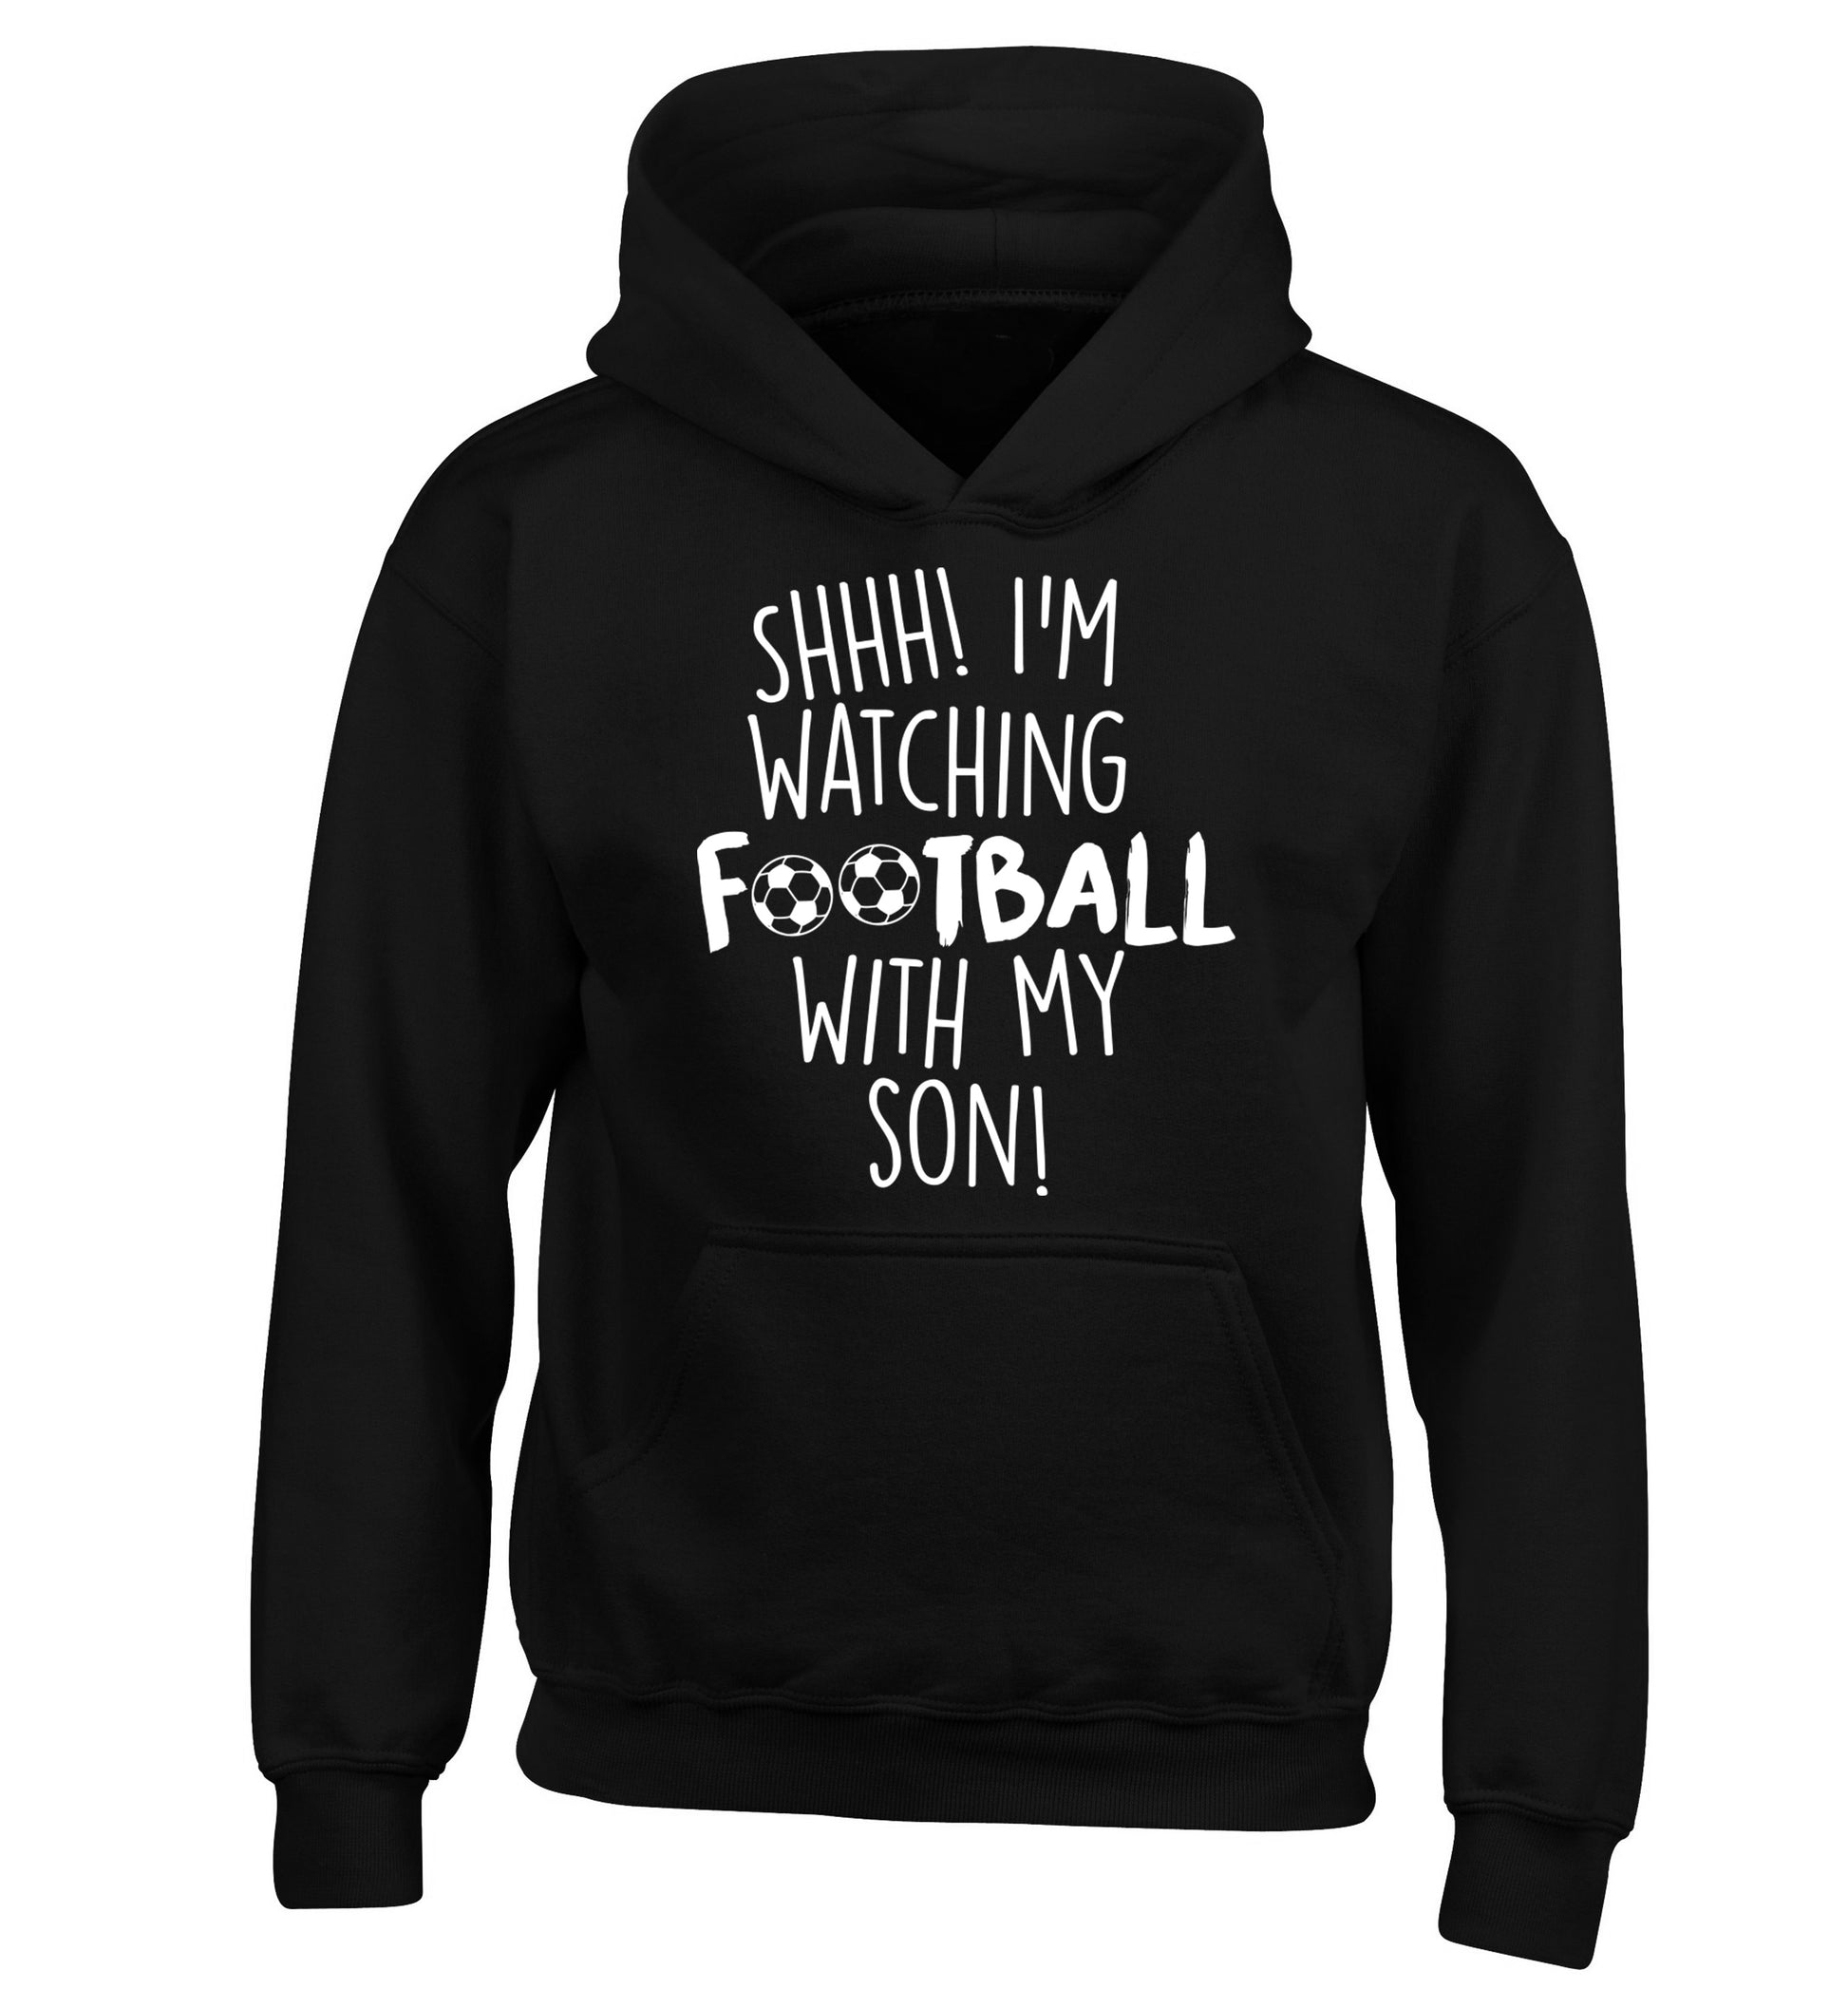 Shhh I'm watching football with my son children's black hoodie 12-14 Years